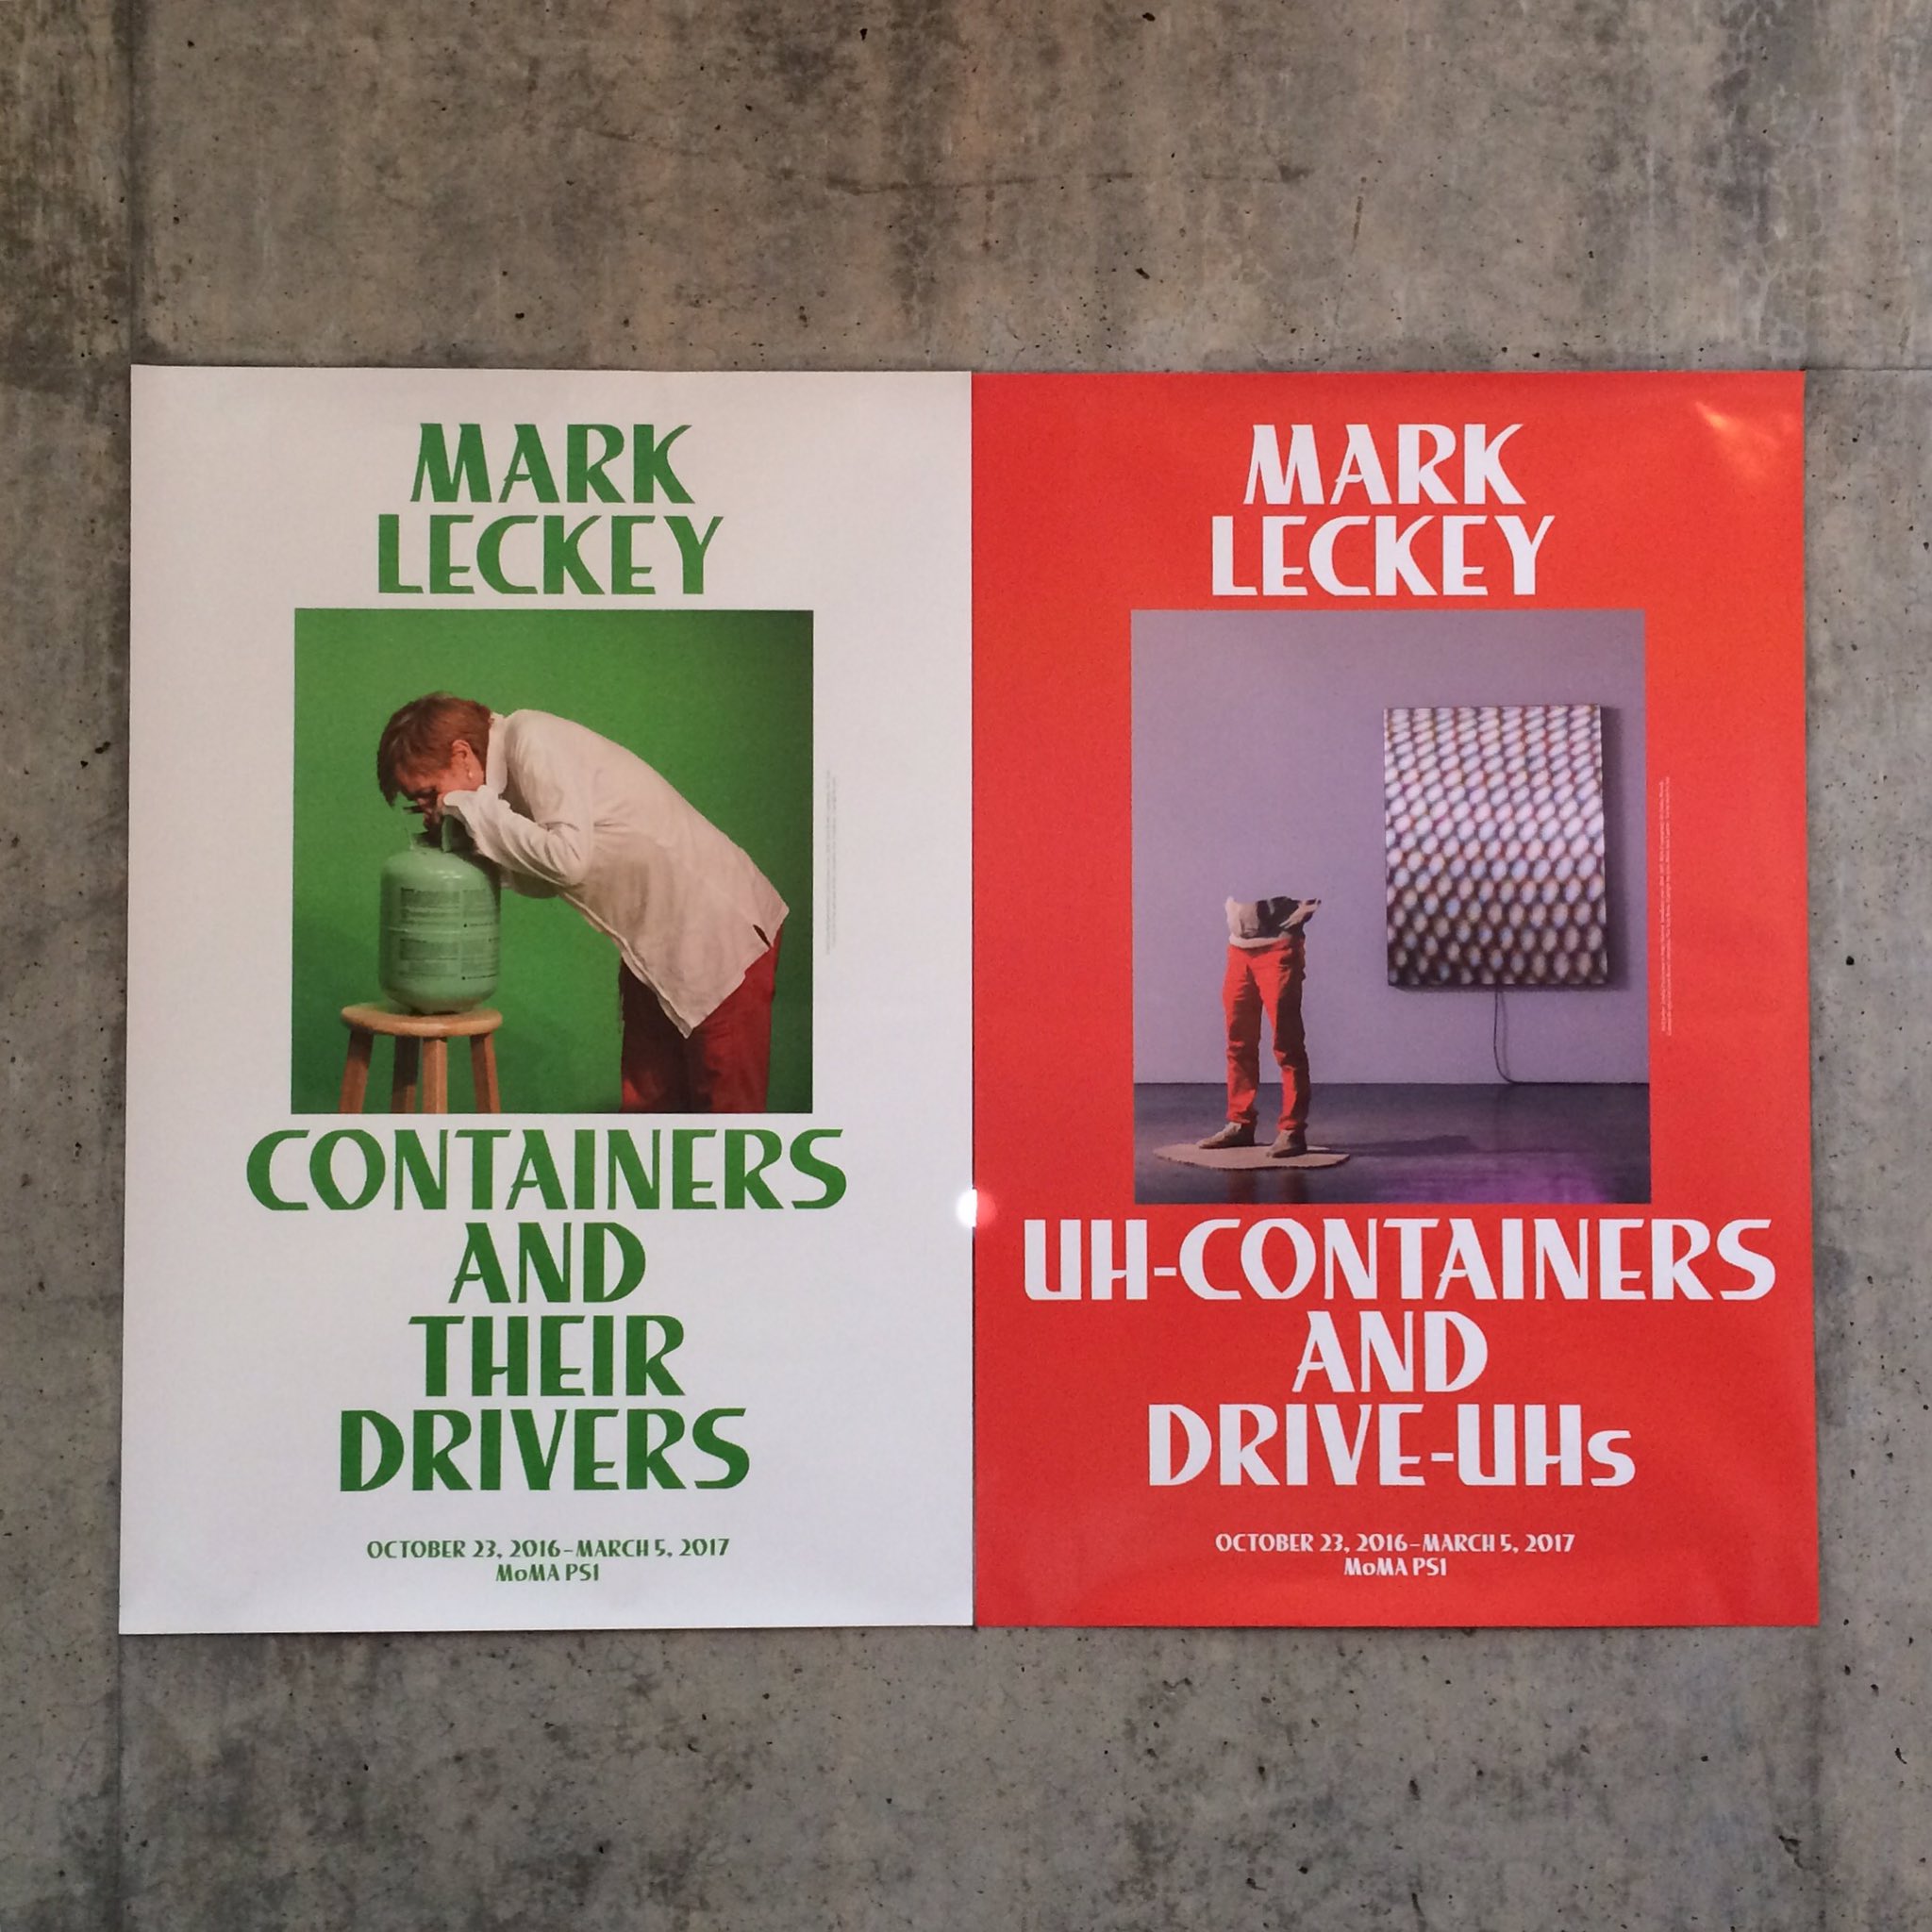 Artbook @ MoMA PS1 on Twitter: "Mark Leckey's "Containers and Their Drivers" is on view at MoMA PS1 thru March. Posters are on sale in the Bookstore Magazine Store now! https://t.co/22Uq7wLjBd" /